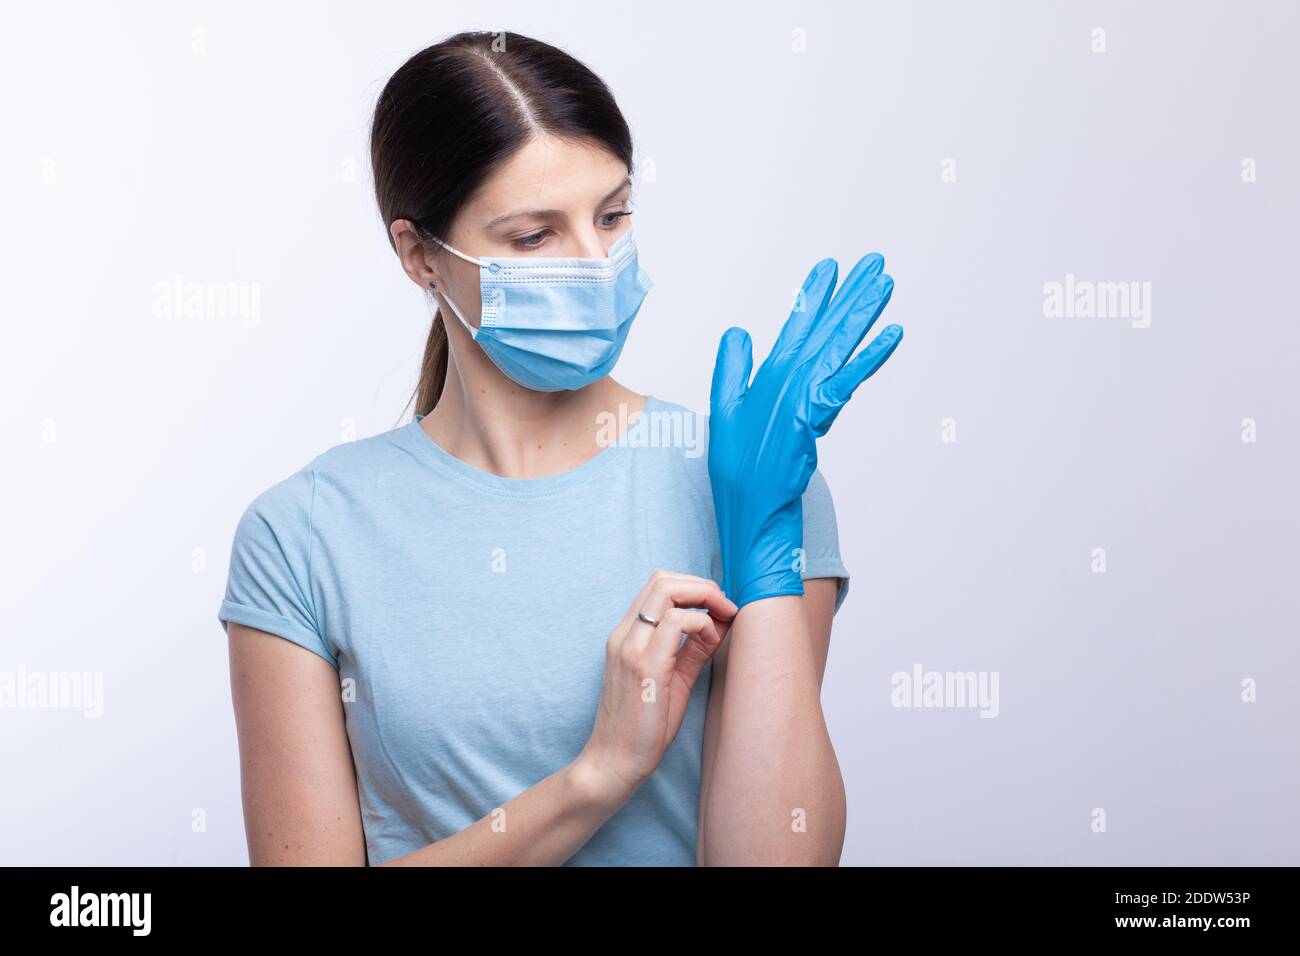 Nurse or doctor profesional uniform with face mask wear and checking protective gloves stock photo Stock Photo